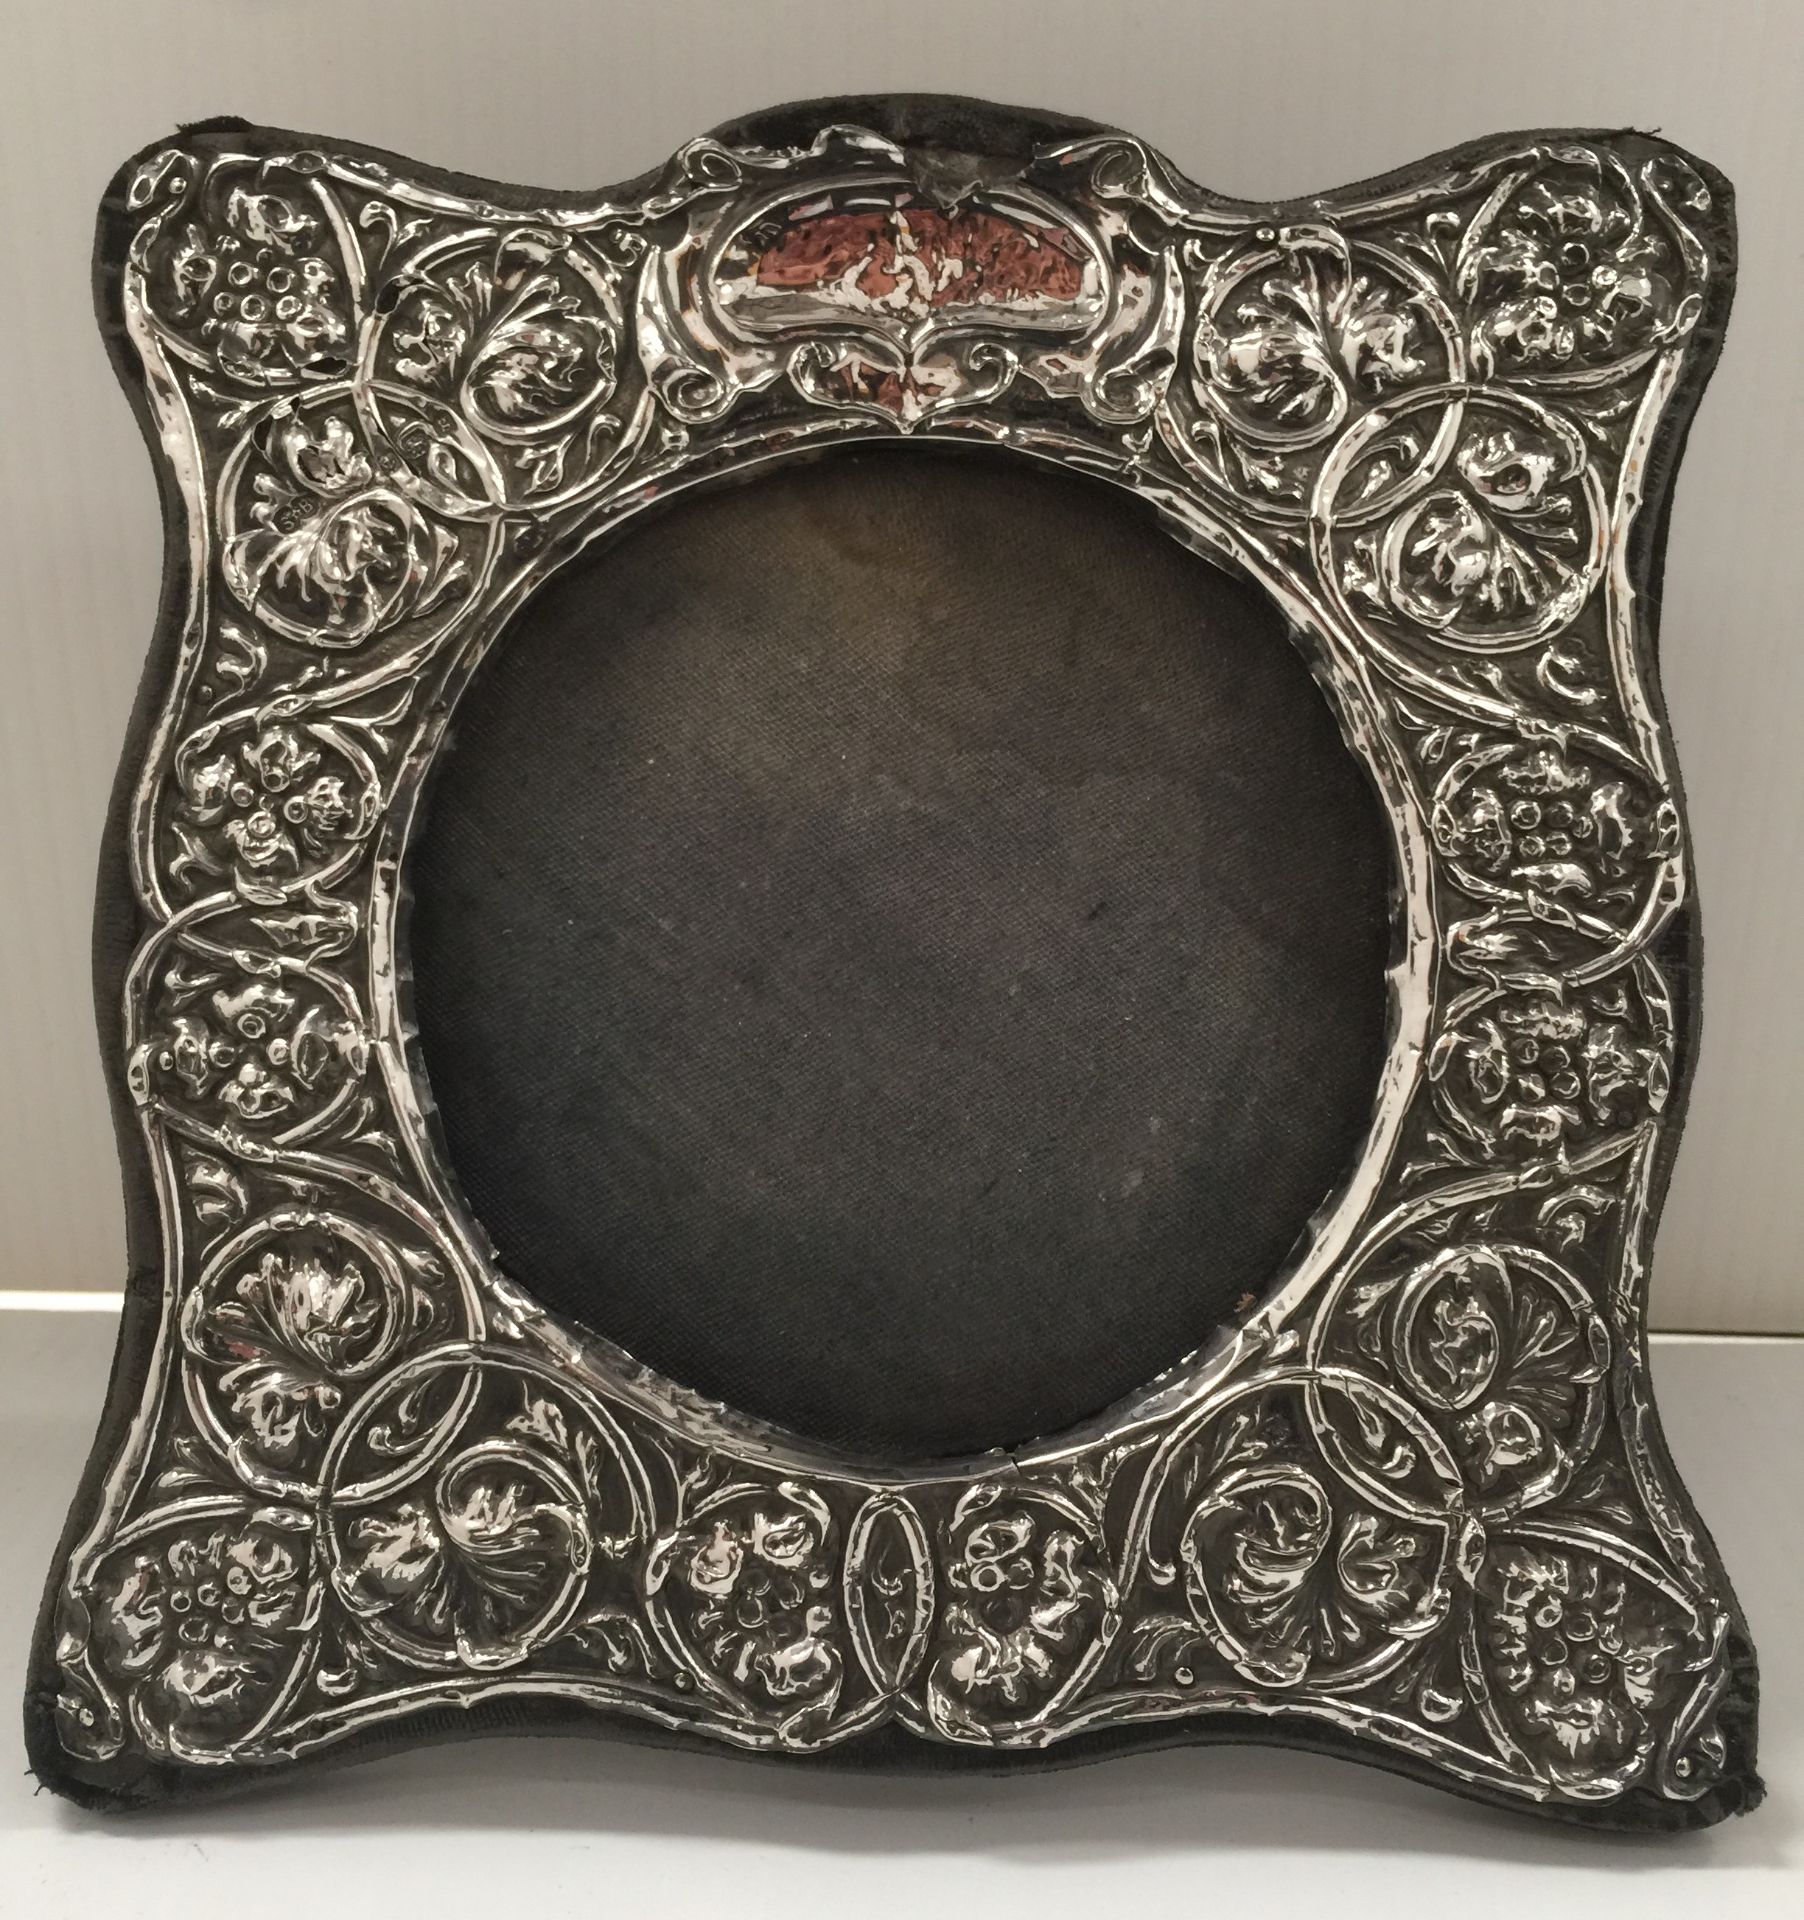 Silver photograph frame, Birmingham 1906, Snyder and Beddoes,